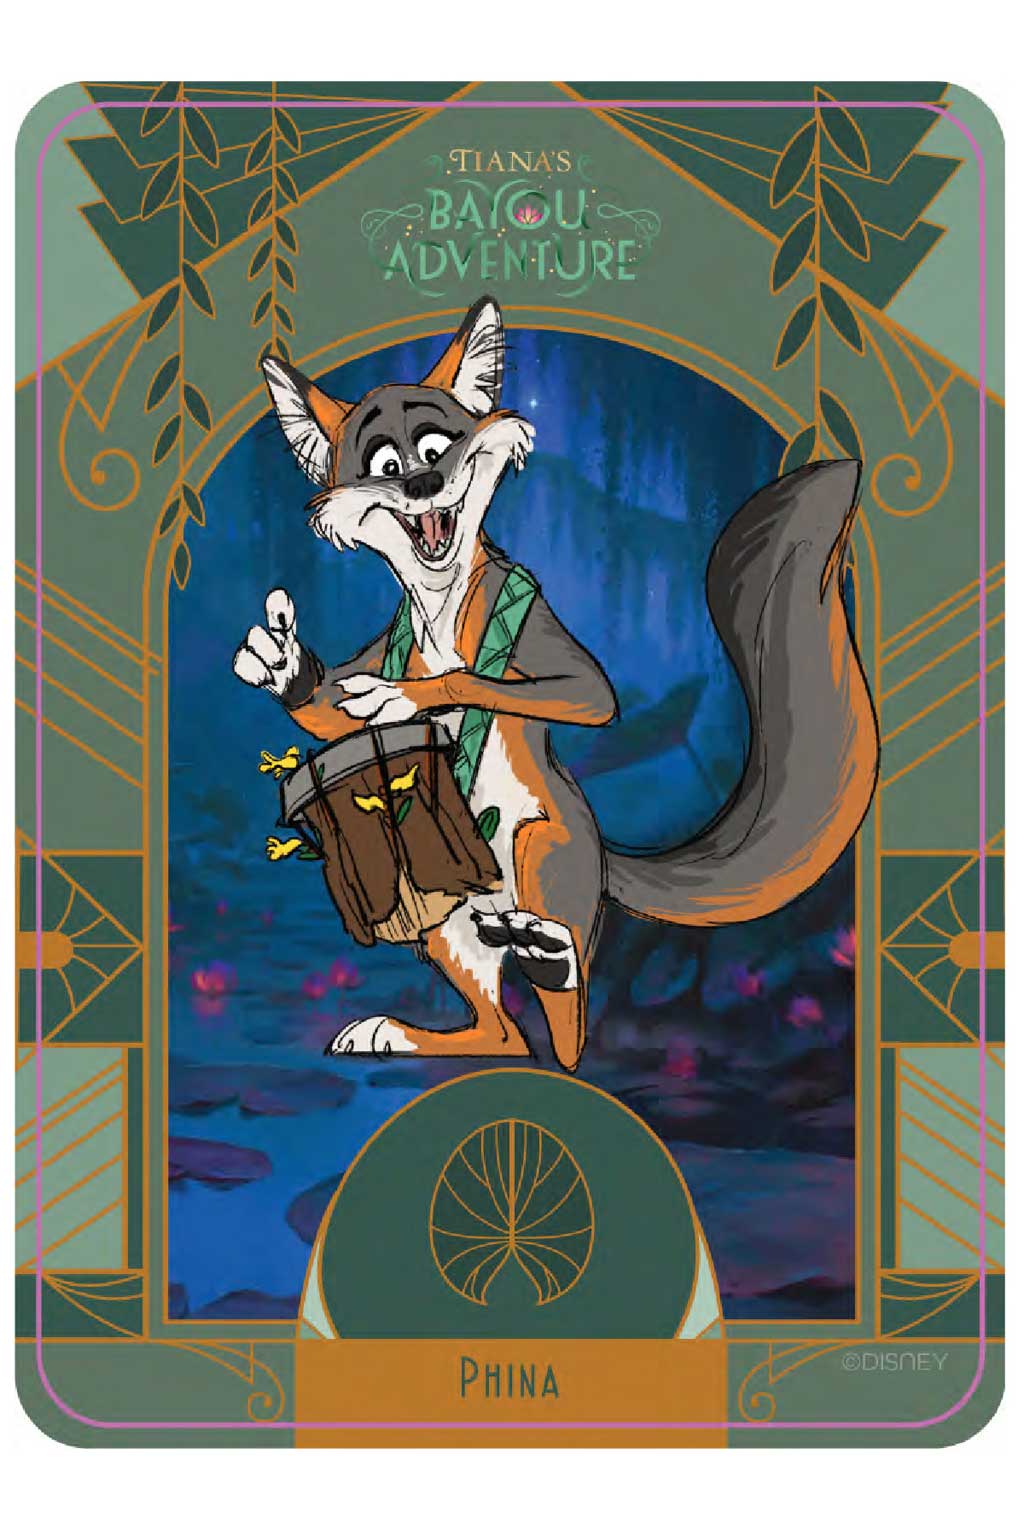 Phina the Gray Fox – Phina’s enthusiasm extends beyond her drumming, as she’s constantly thinking of new ideas with optimism and energy! This imaginative fox is continually starting new projects with excitement, and her friends accept and celebrate her unique thinking.